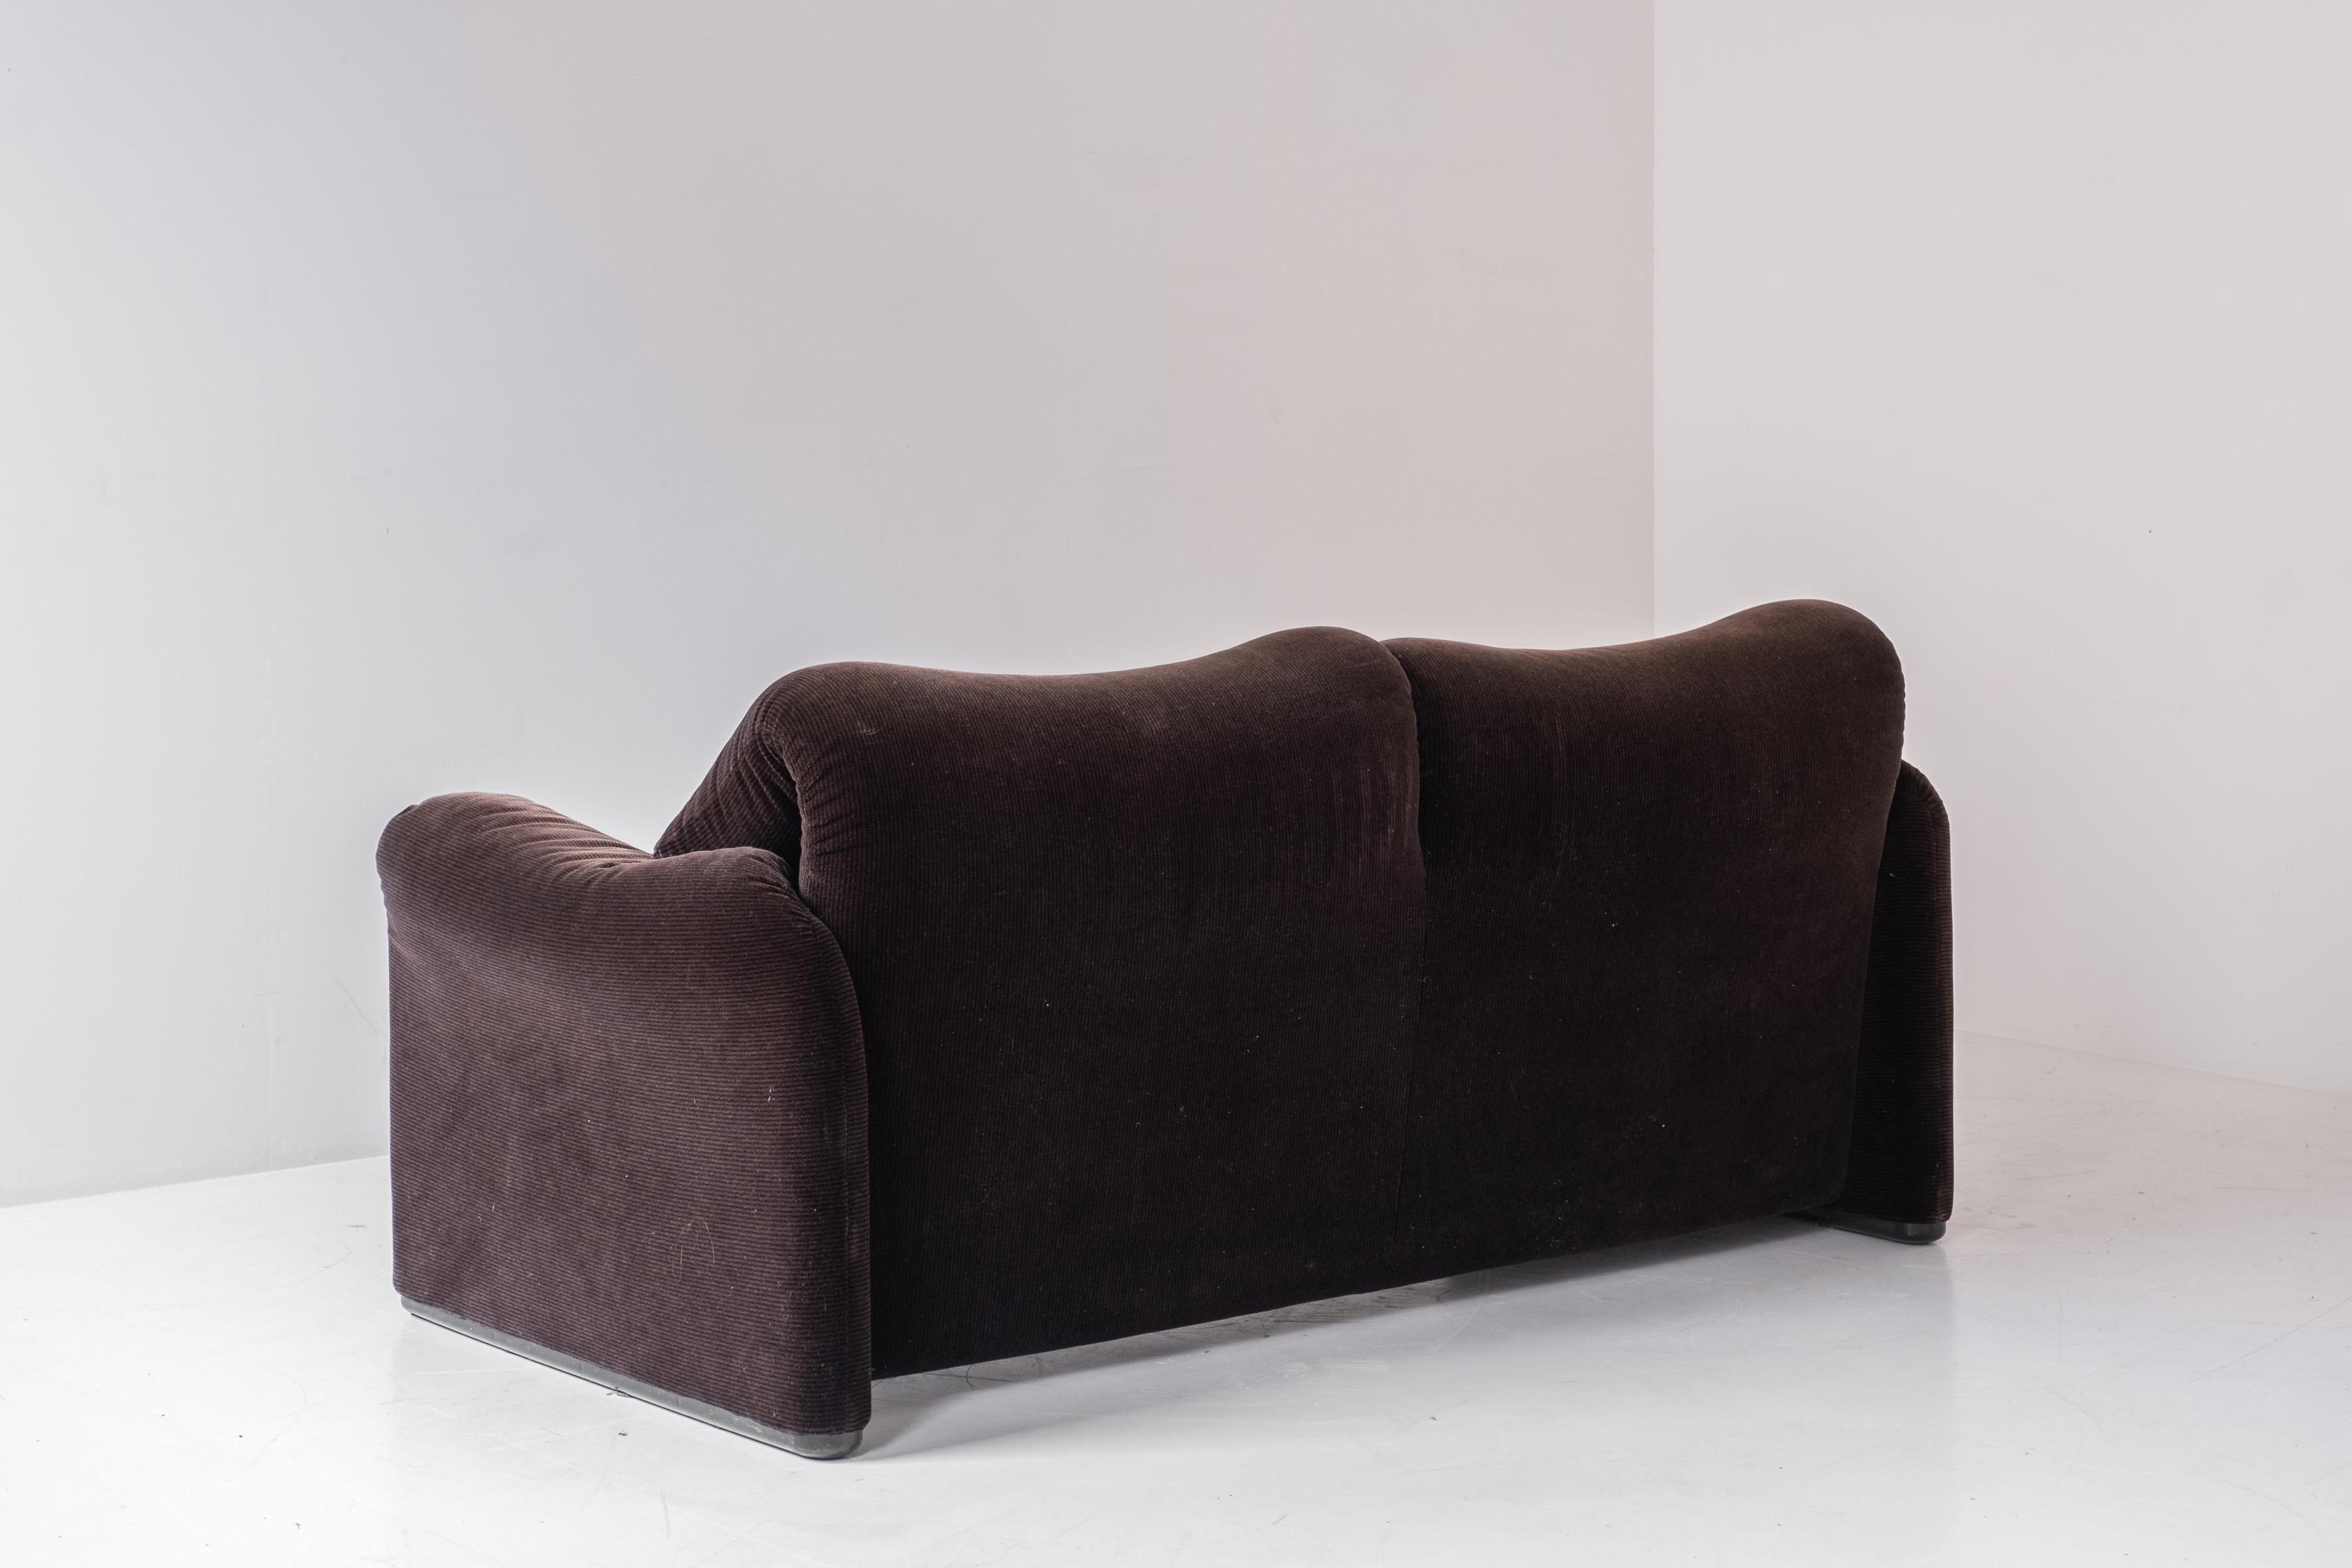 Velvet Maralunga two-seater by Vico Magistretti for Cassina, Italy 1970s.